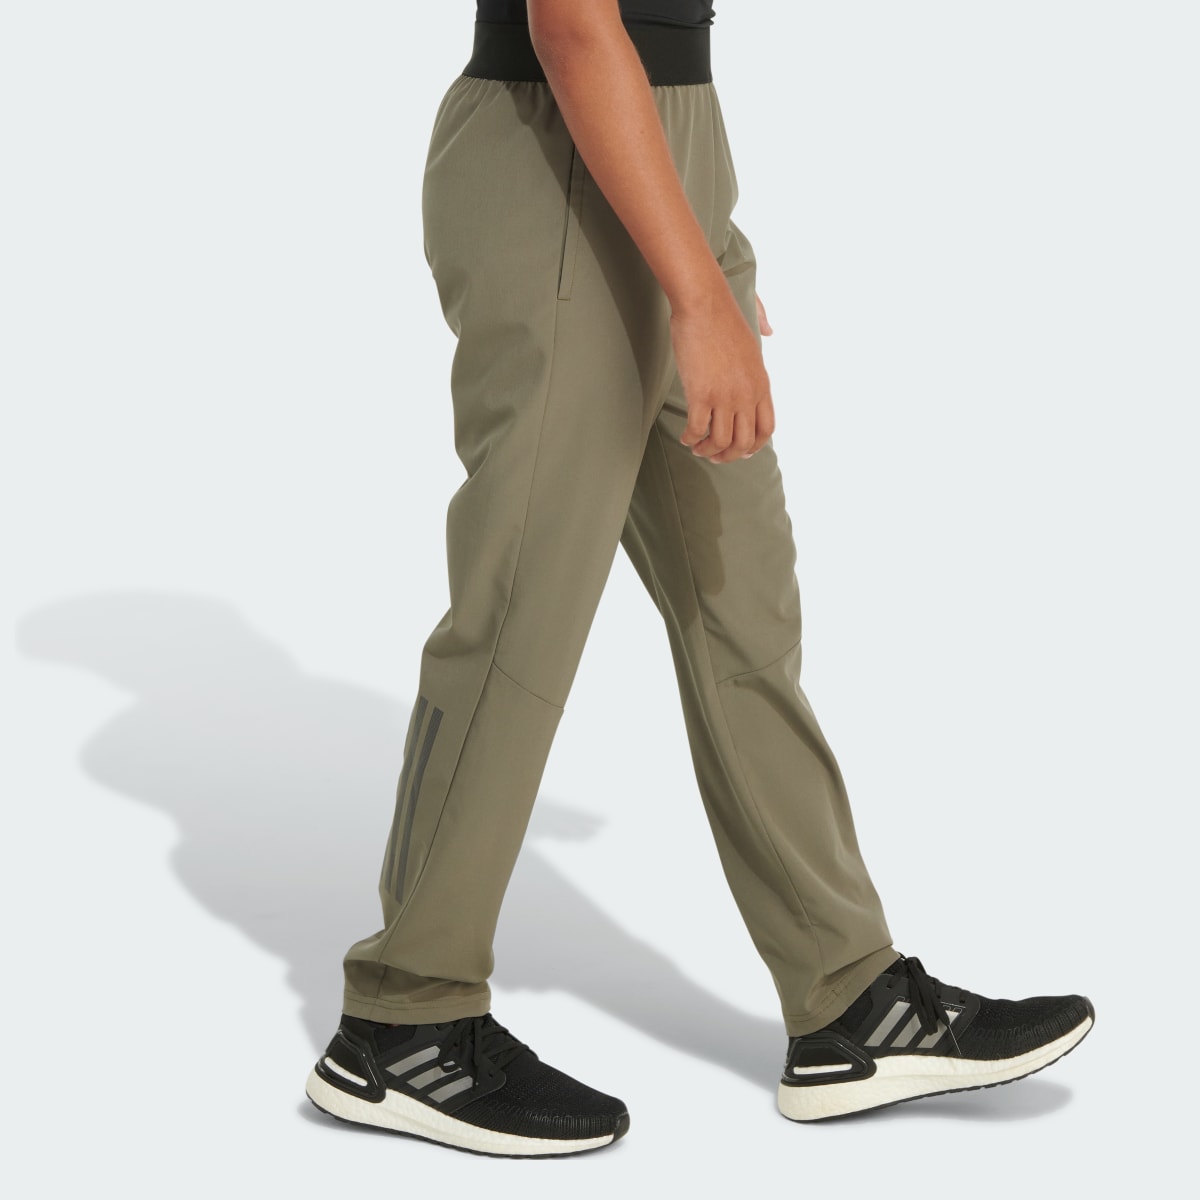 Adidas Designed for Training Stretch Woven Pants. 5